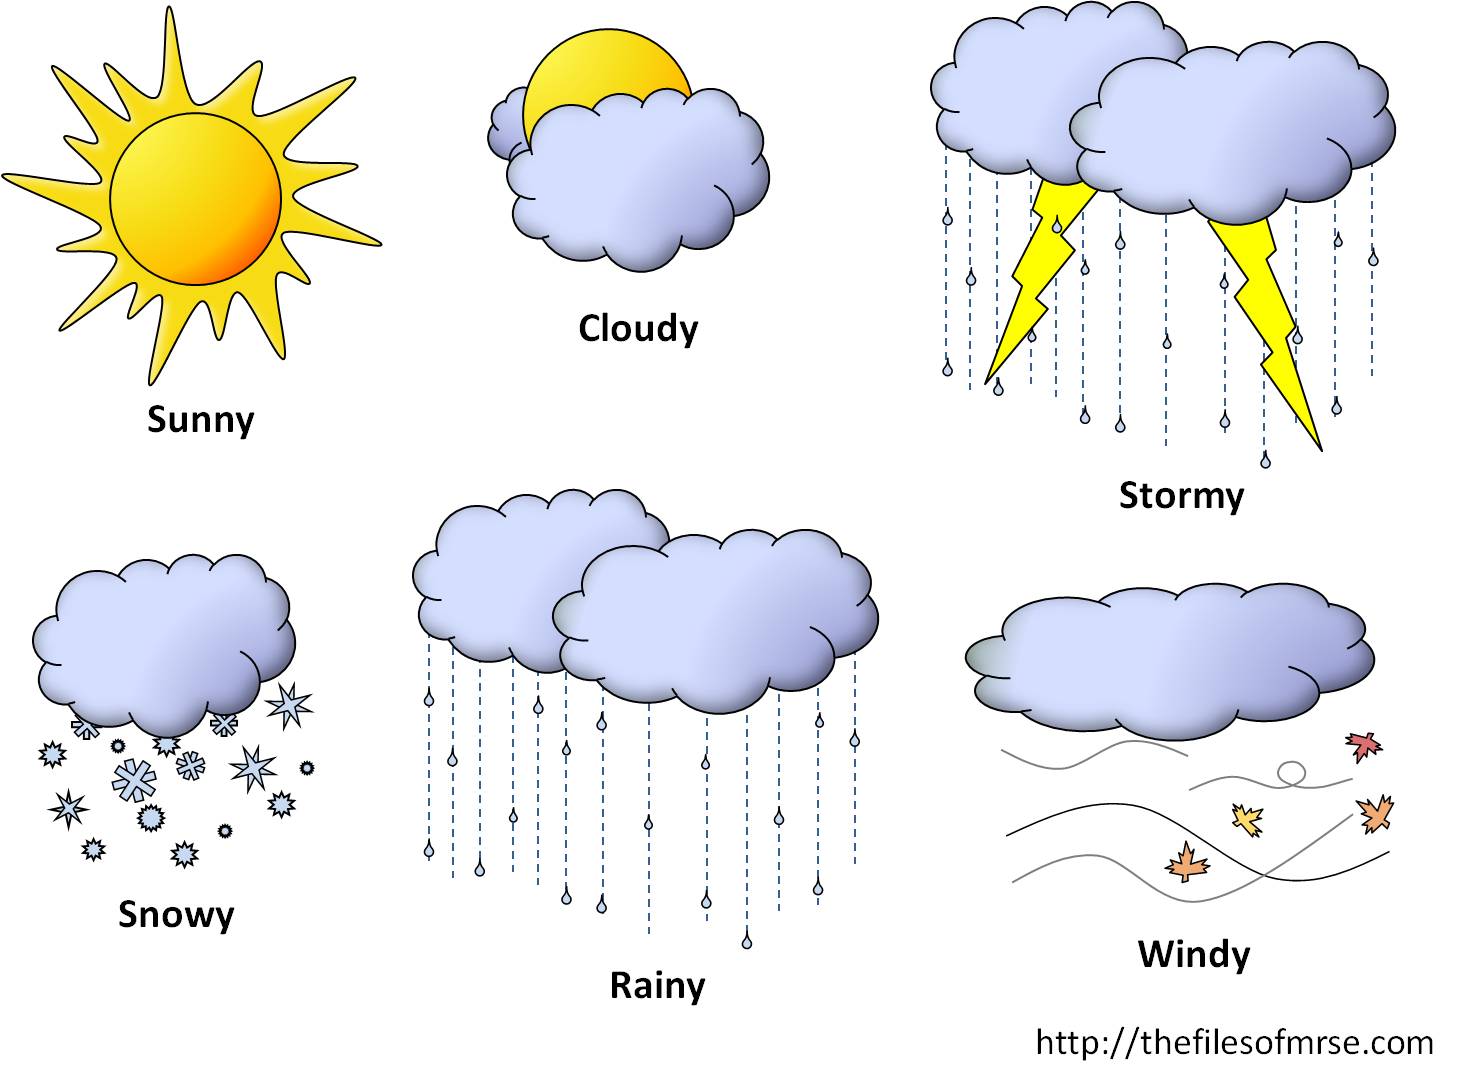 weather clipart